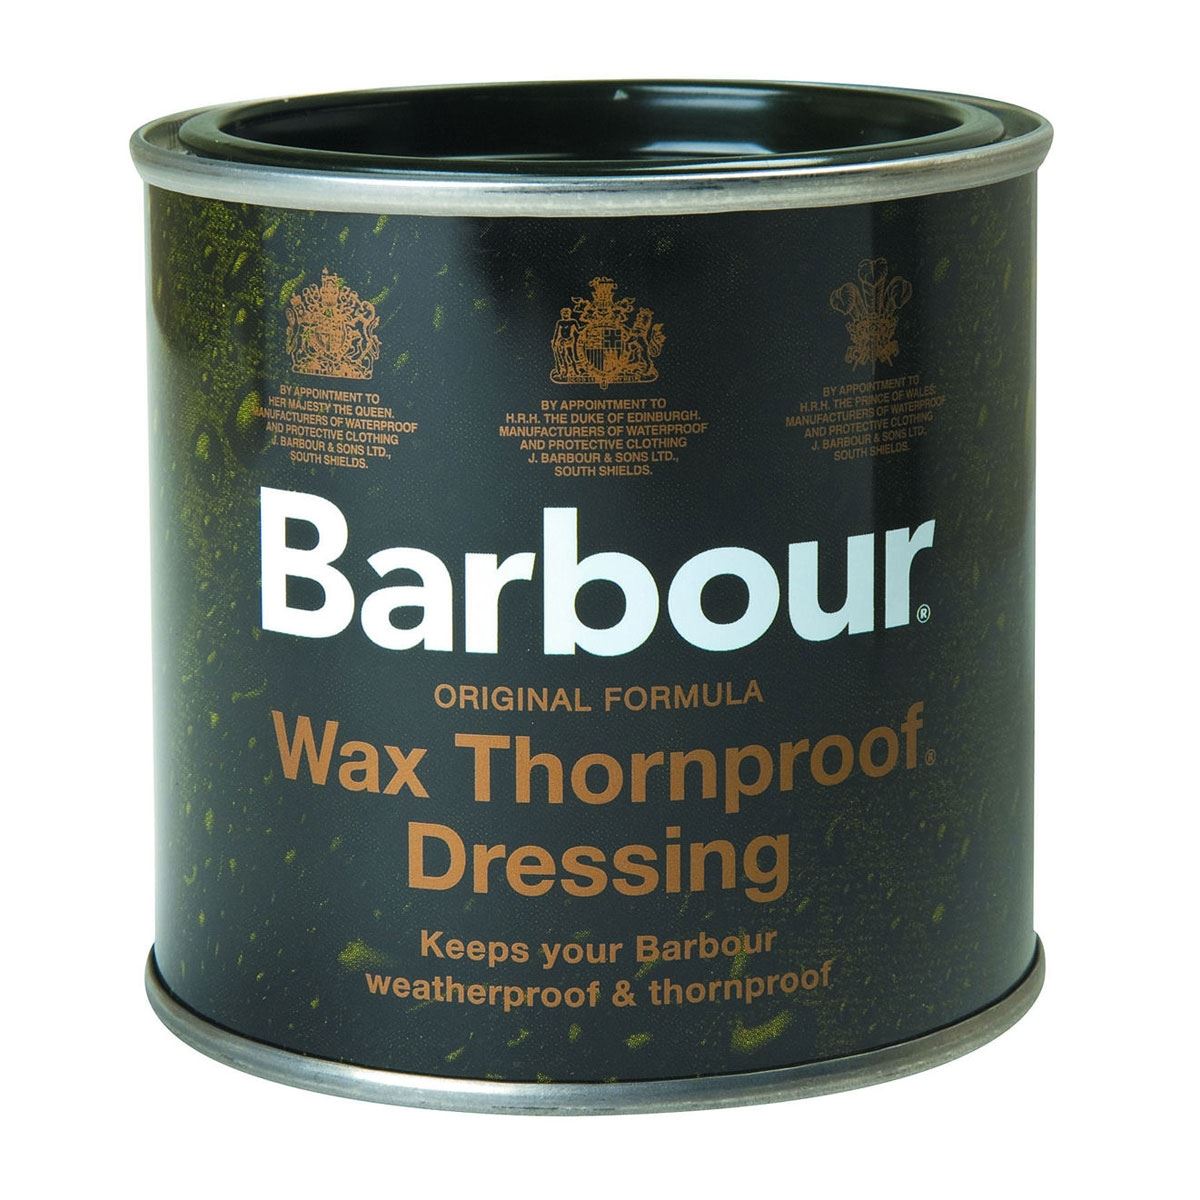 What is the quantity of Barbour wax in a tin of Thornproof Dressing?